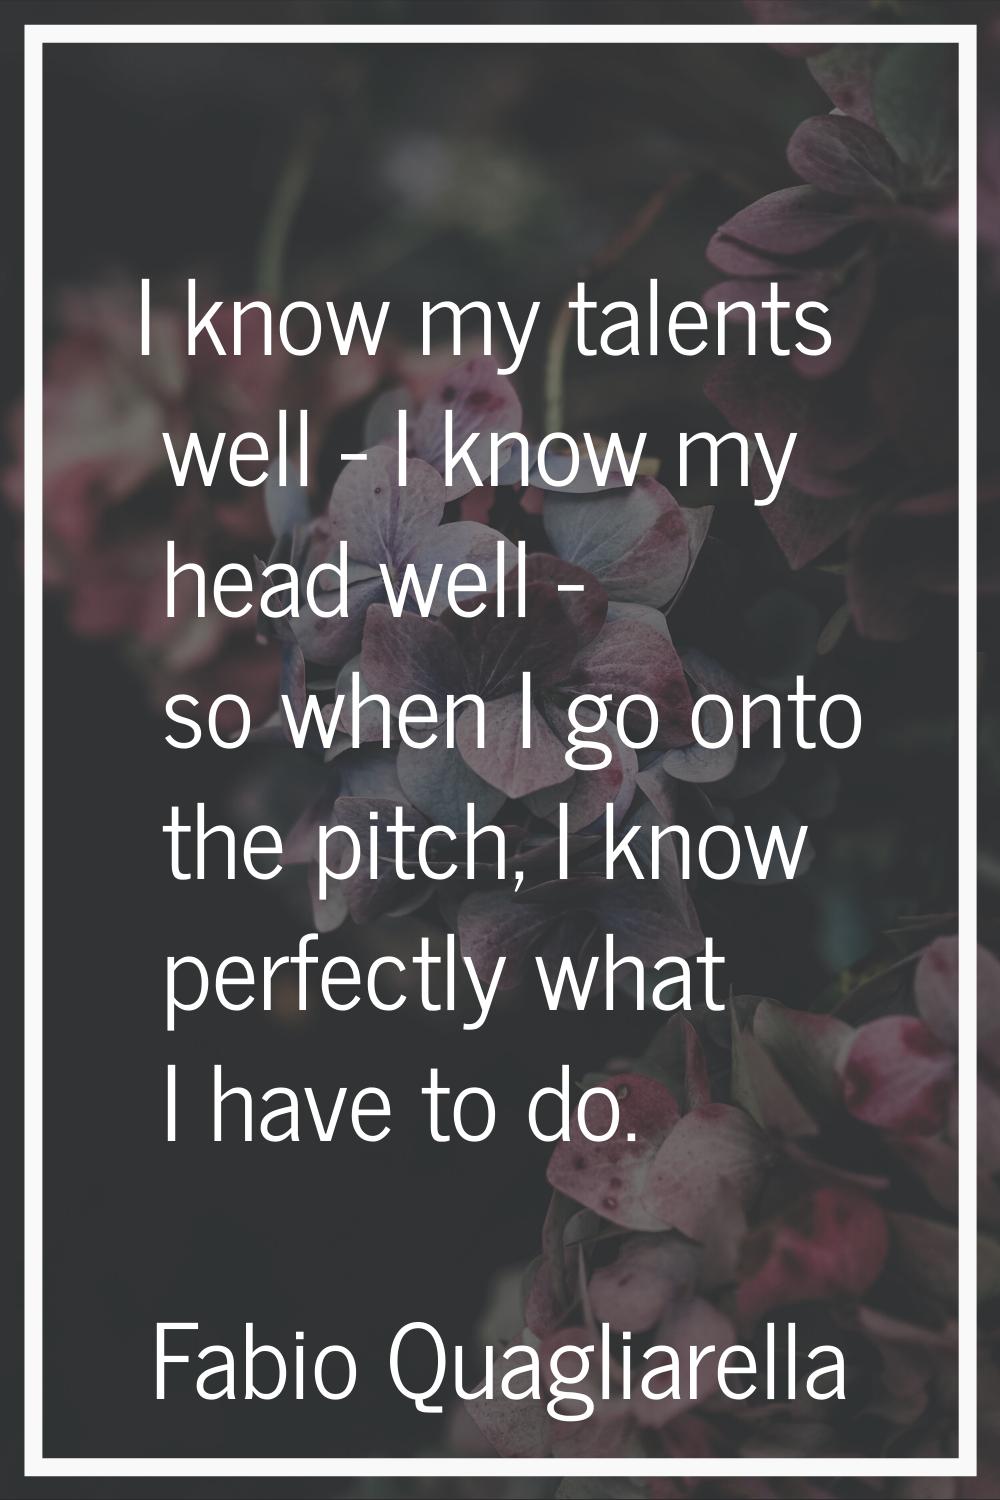 I know my talents well - I know my head well - so when I go onto the pitch, I know perfectly what I